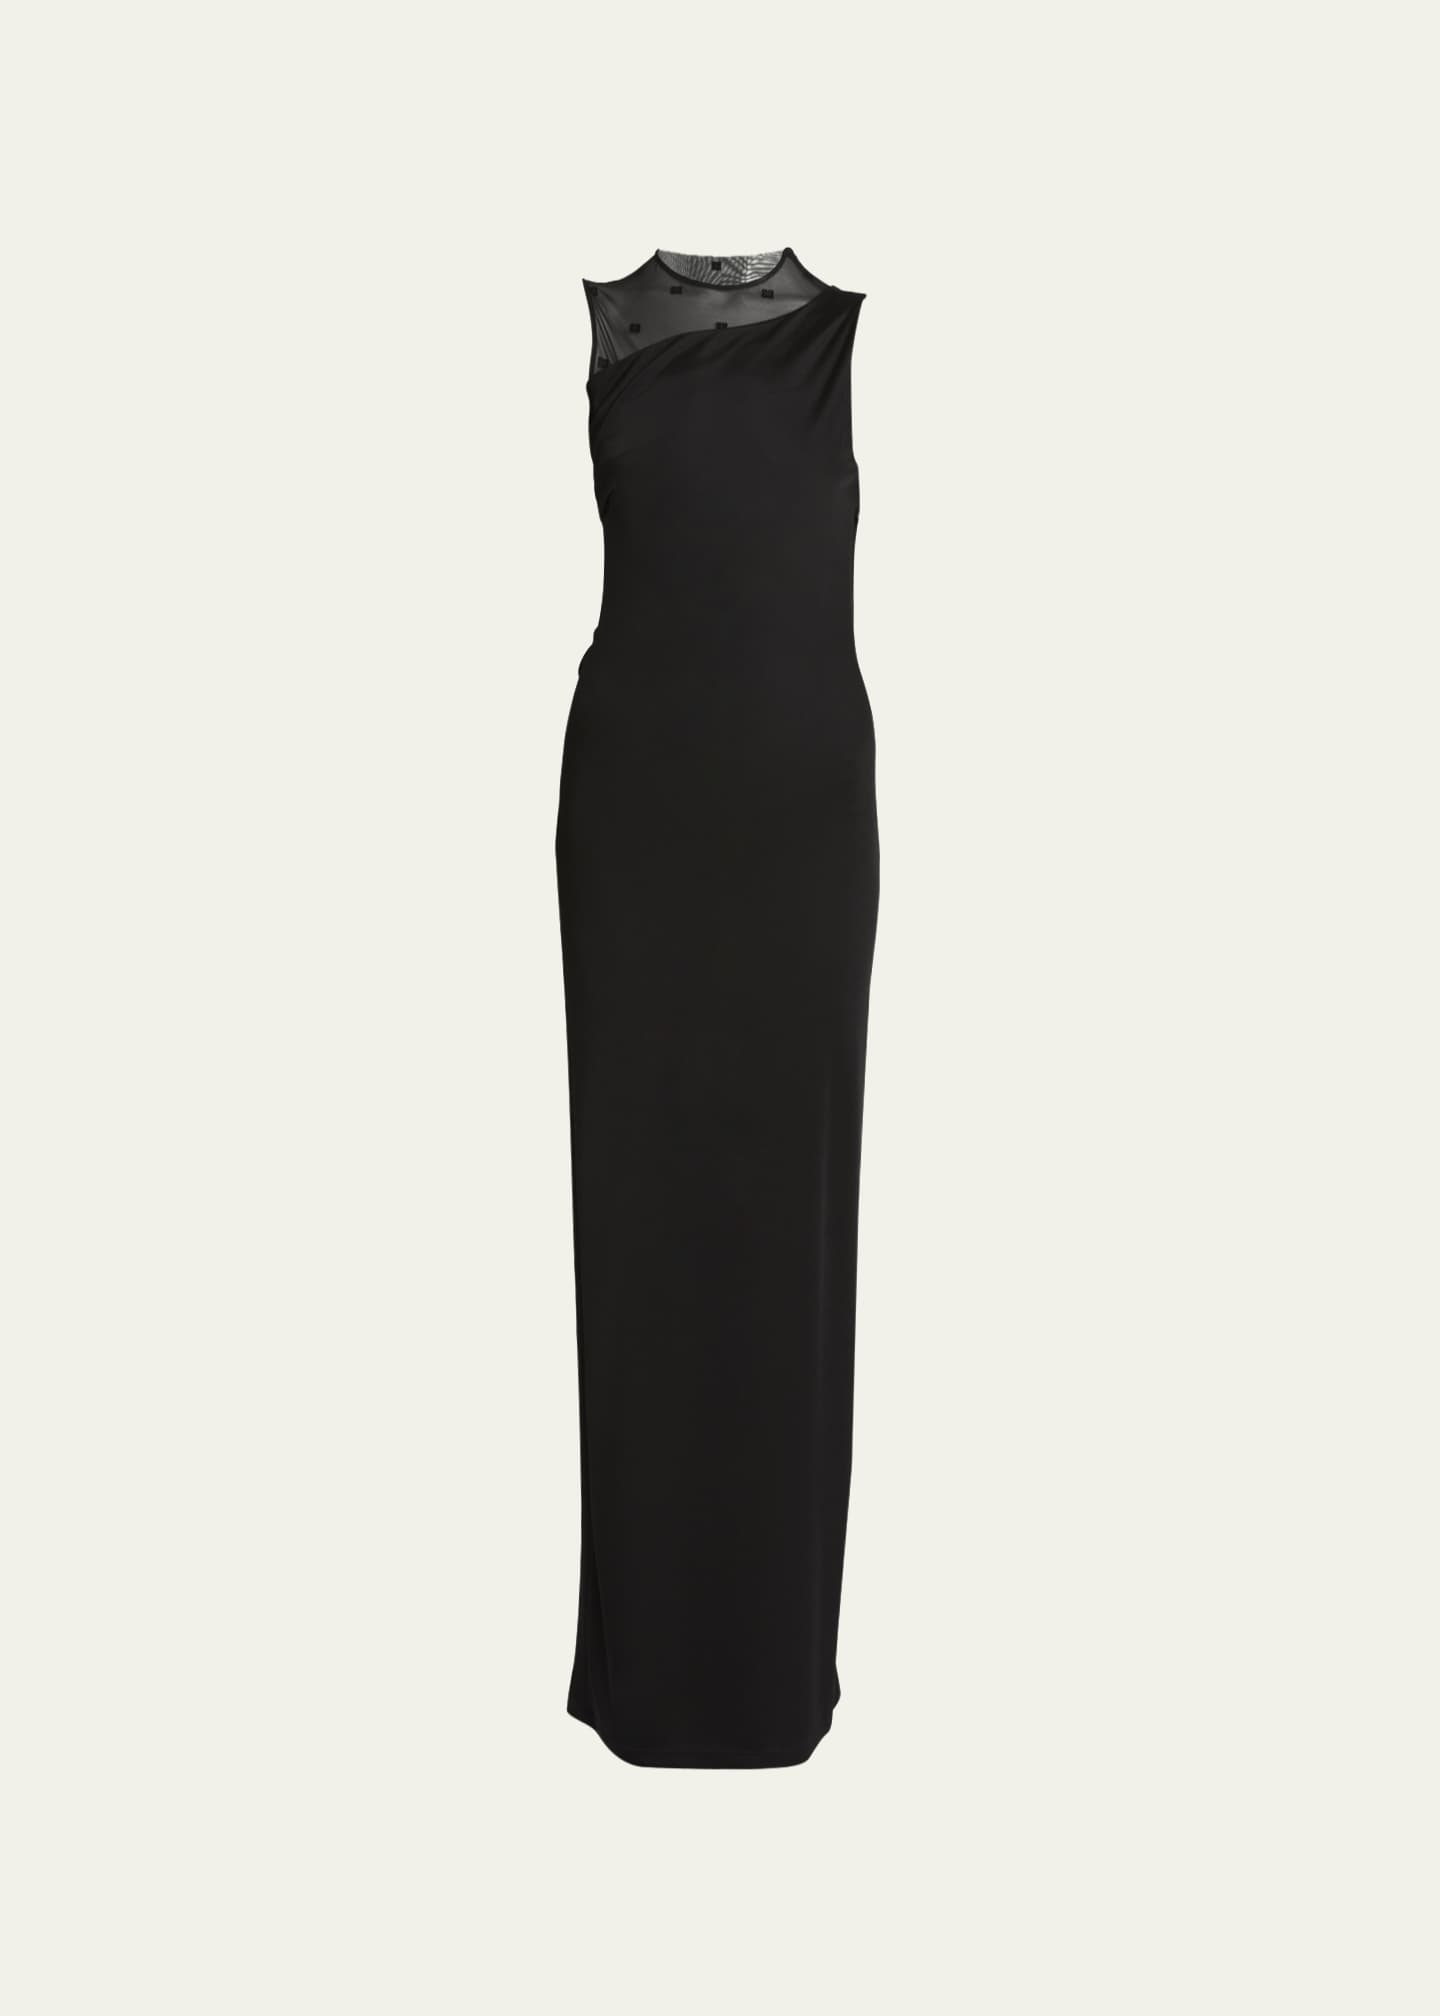 Givenchy Satin Column Gown with Tulle Inset Detail - Bergdorf Goodman